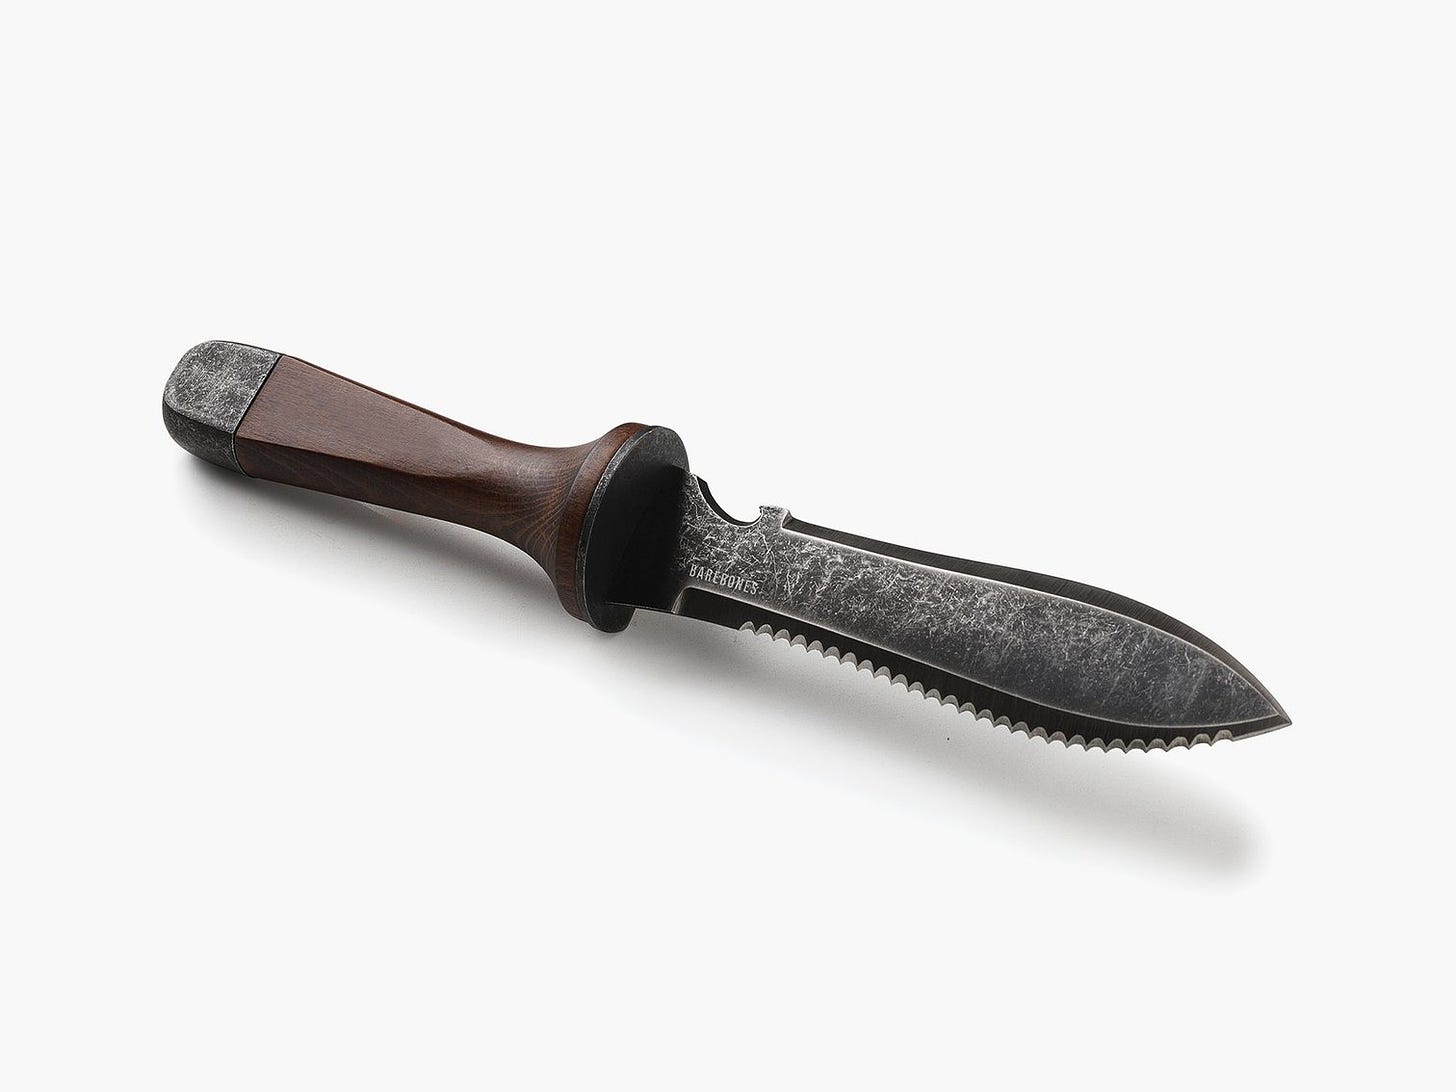 A close-up of a knife

Description automatically generated with low confidence